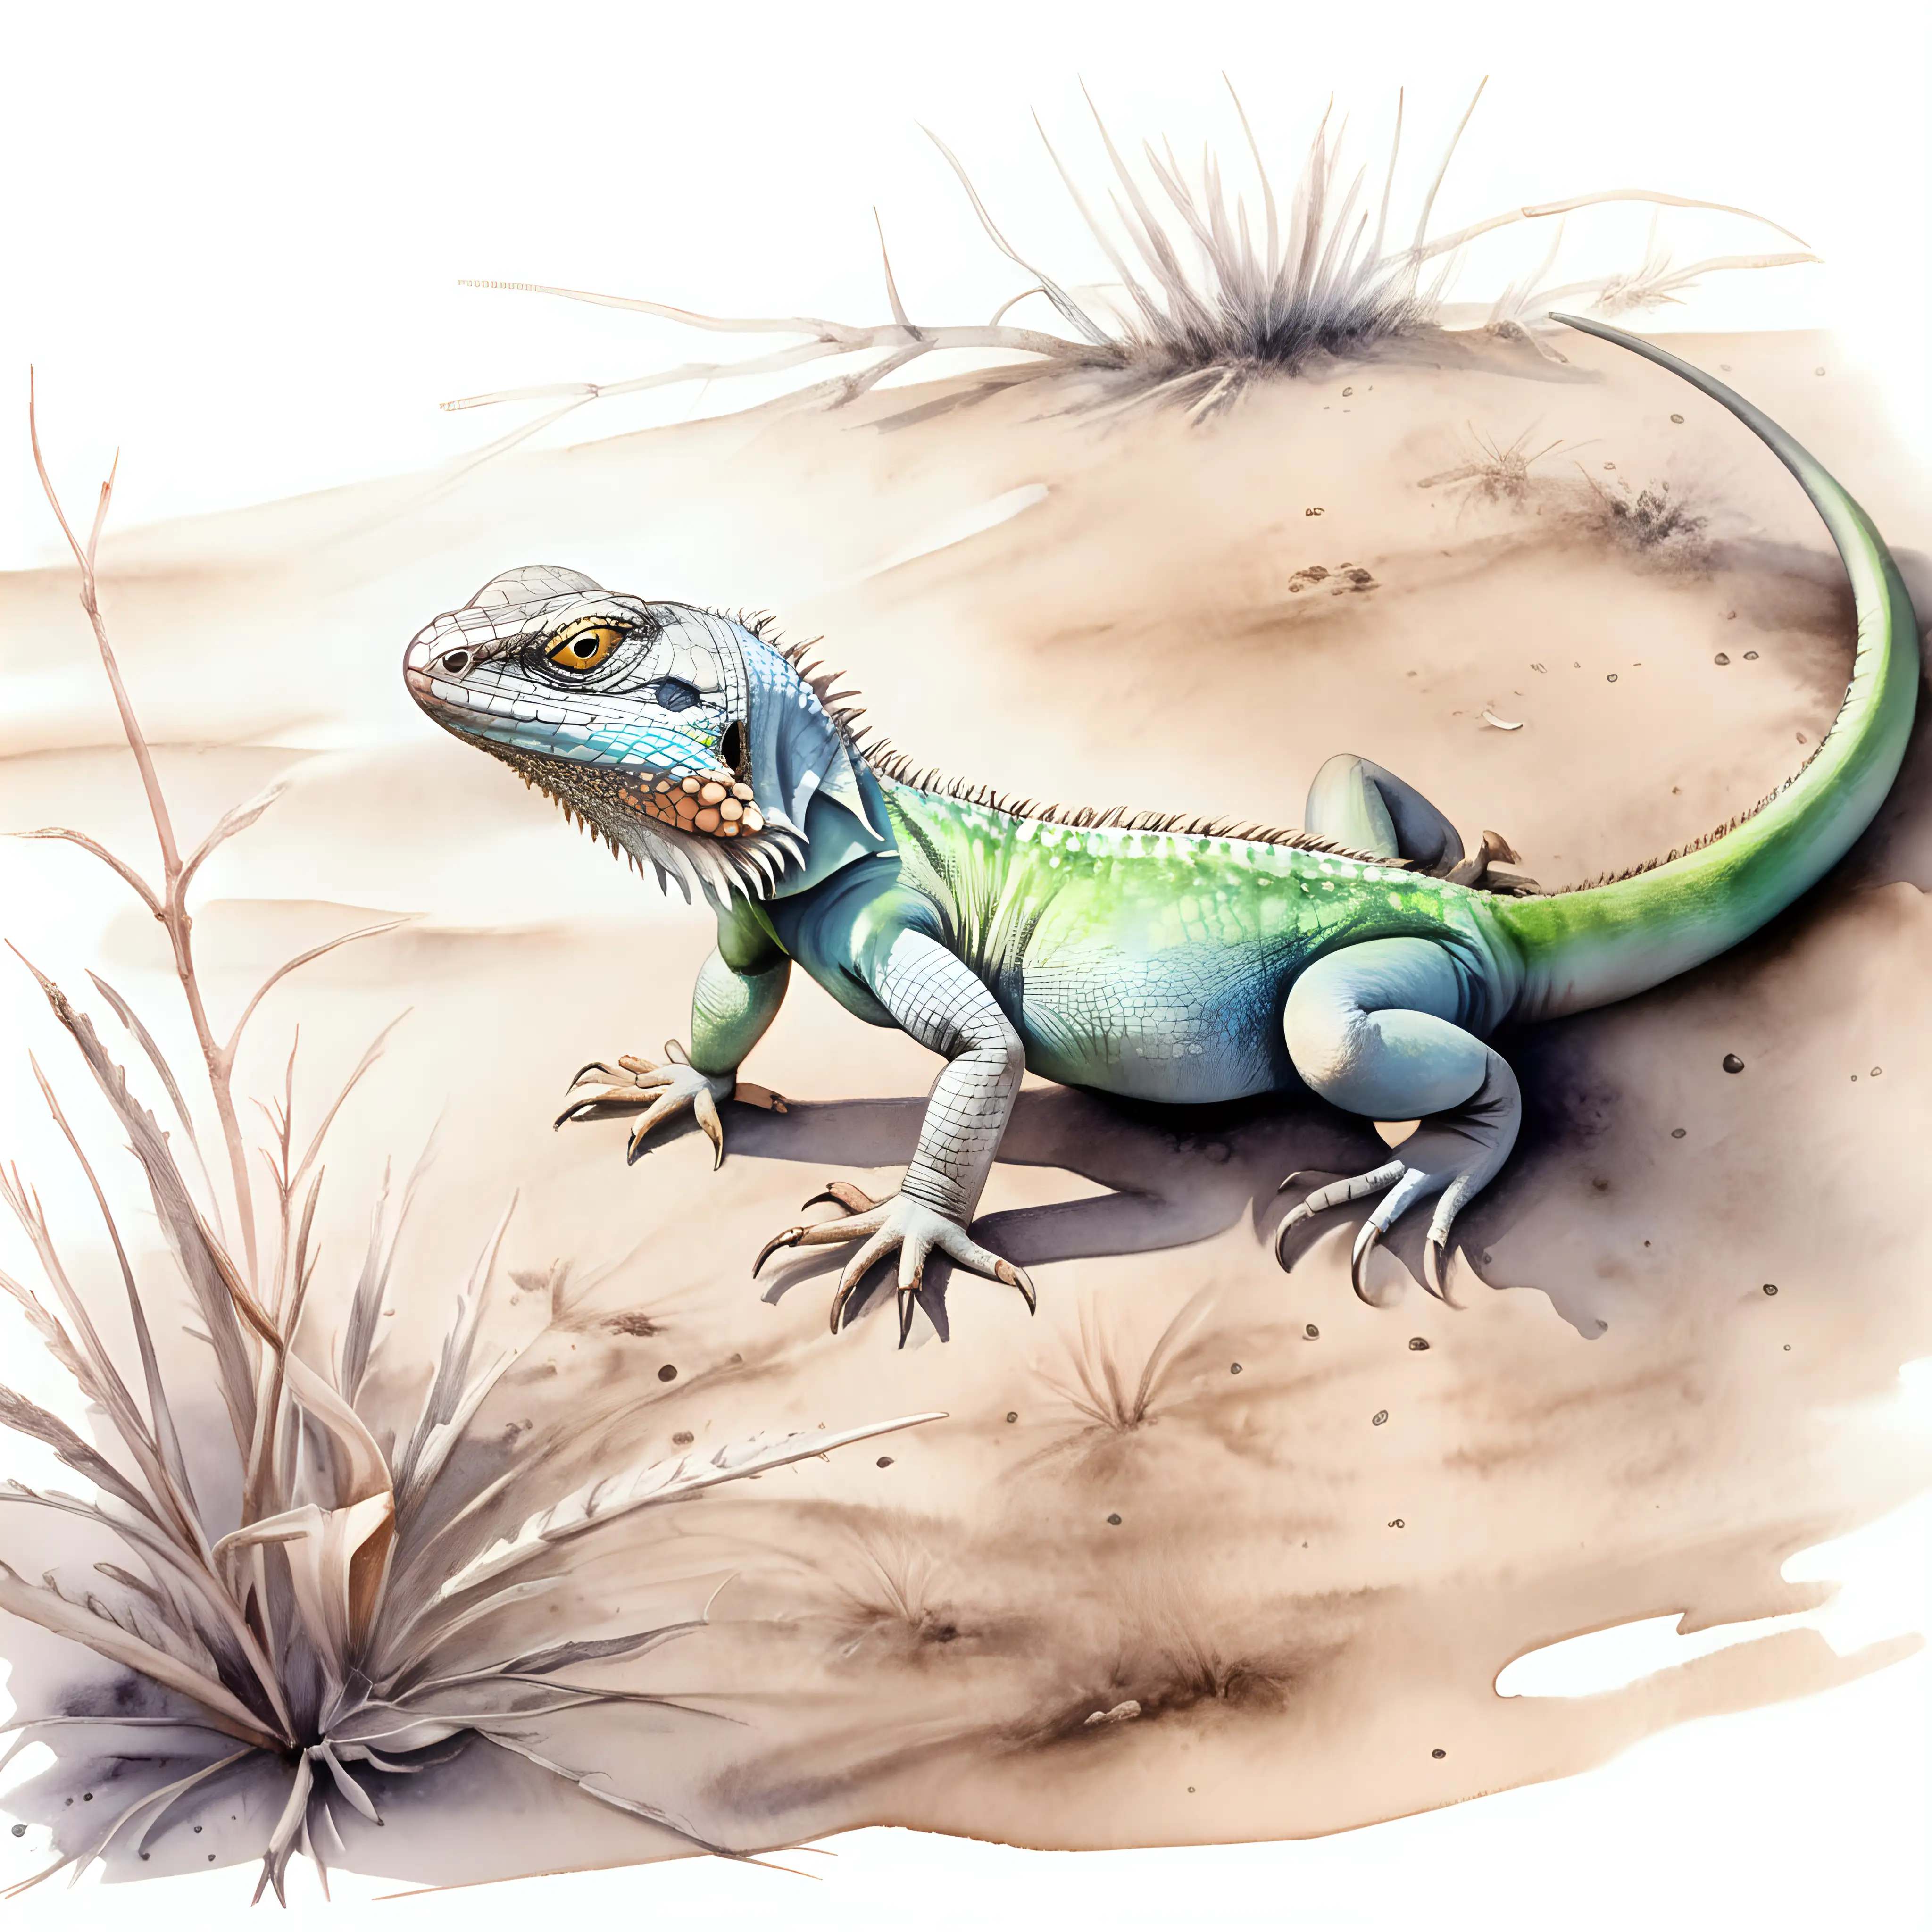 lizard crawling on the ground, dark watercolor drawing, no background